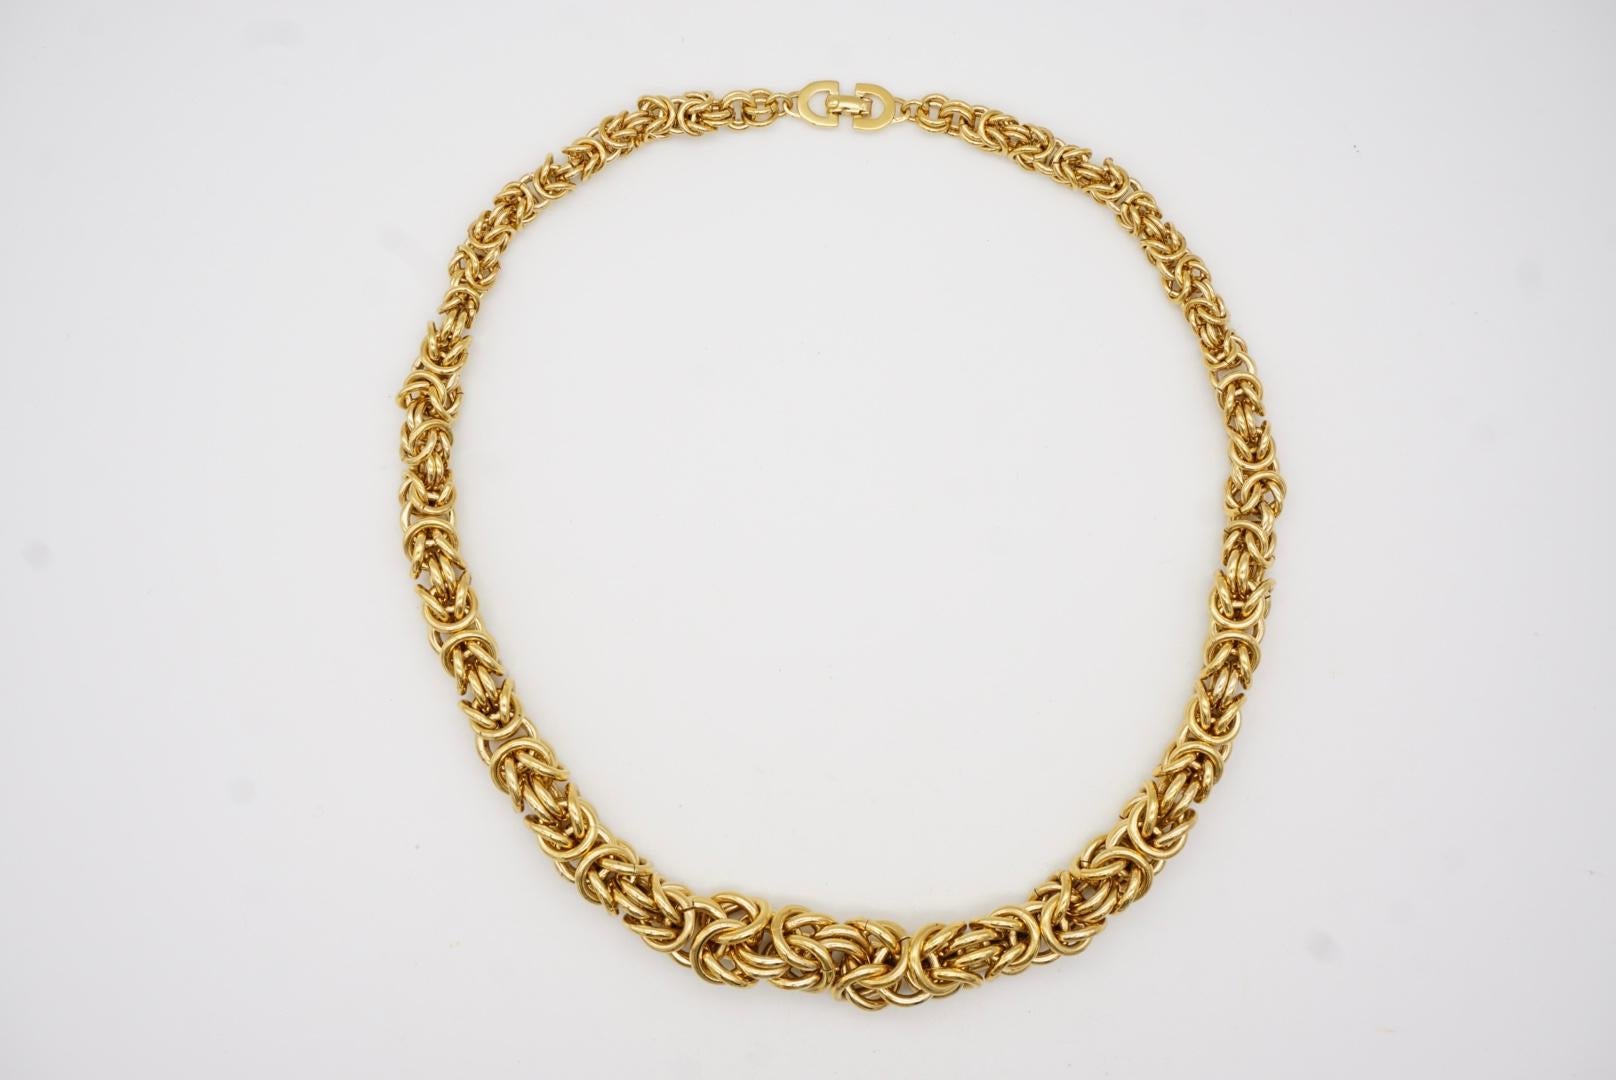 Christian Dior Vintage 1980s Byzantine Braid Royal Mesh Knot Link Rope Necklace For Sale 5